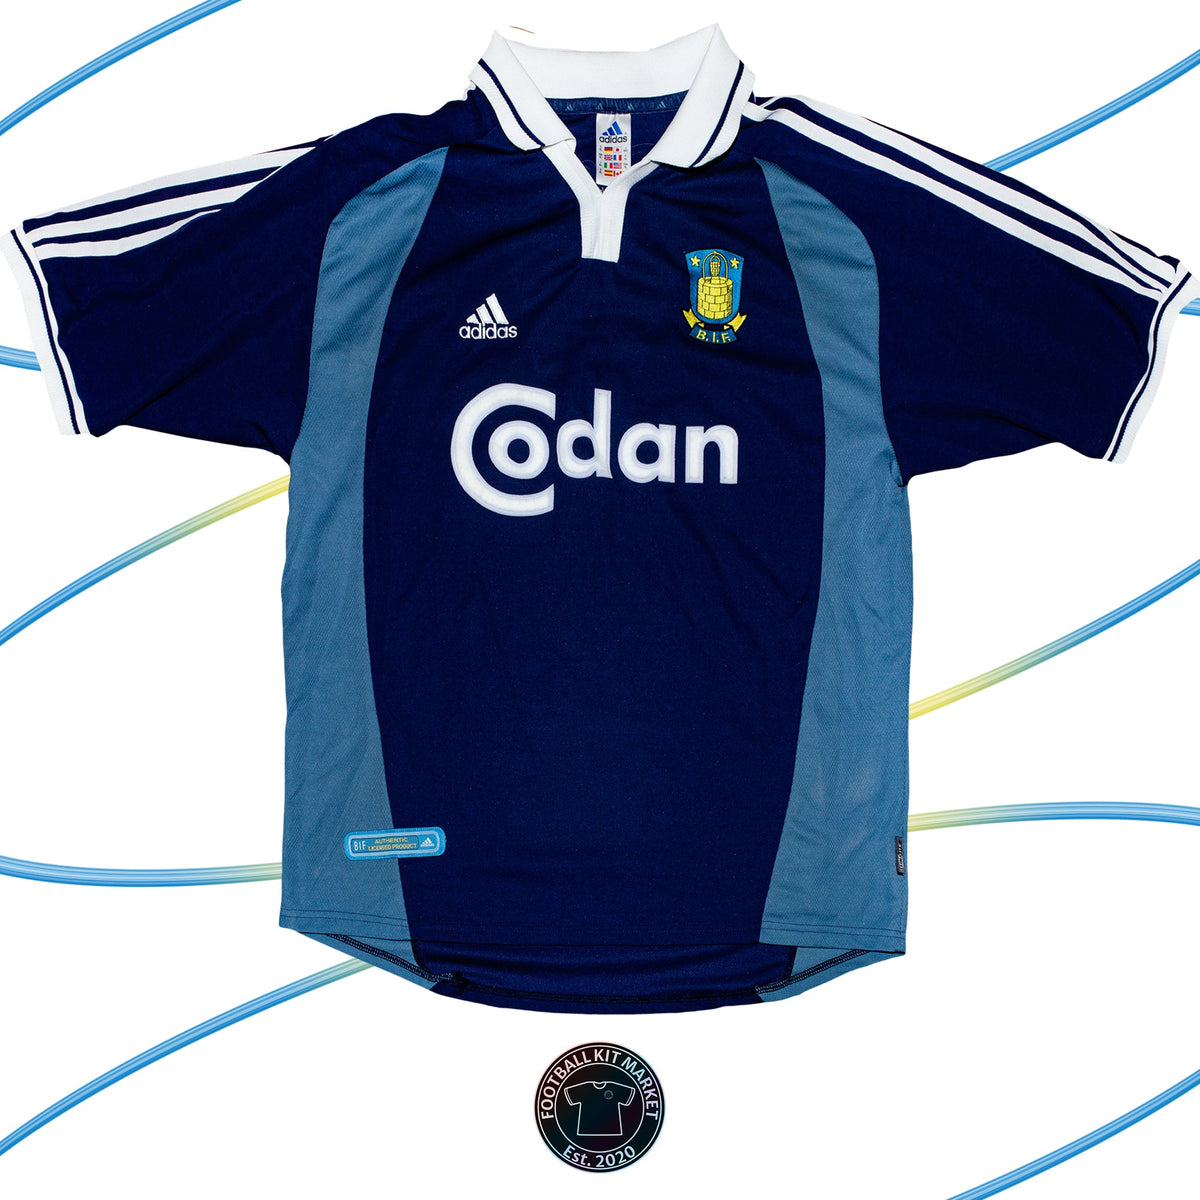 Genuine BRONDBY Away (2001-2002) - ADIDAS (XL) - Product Image from Football Kit Market